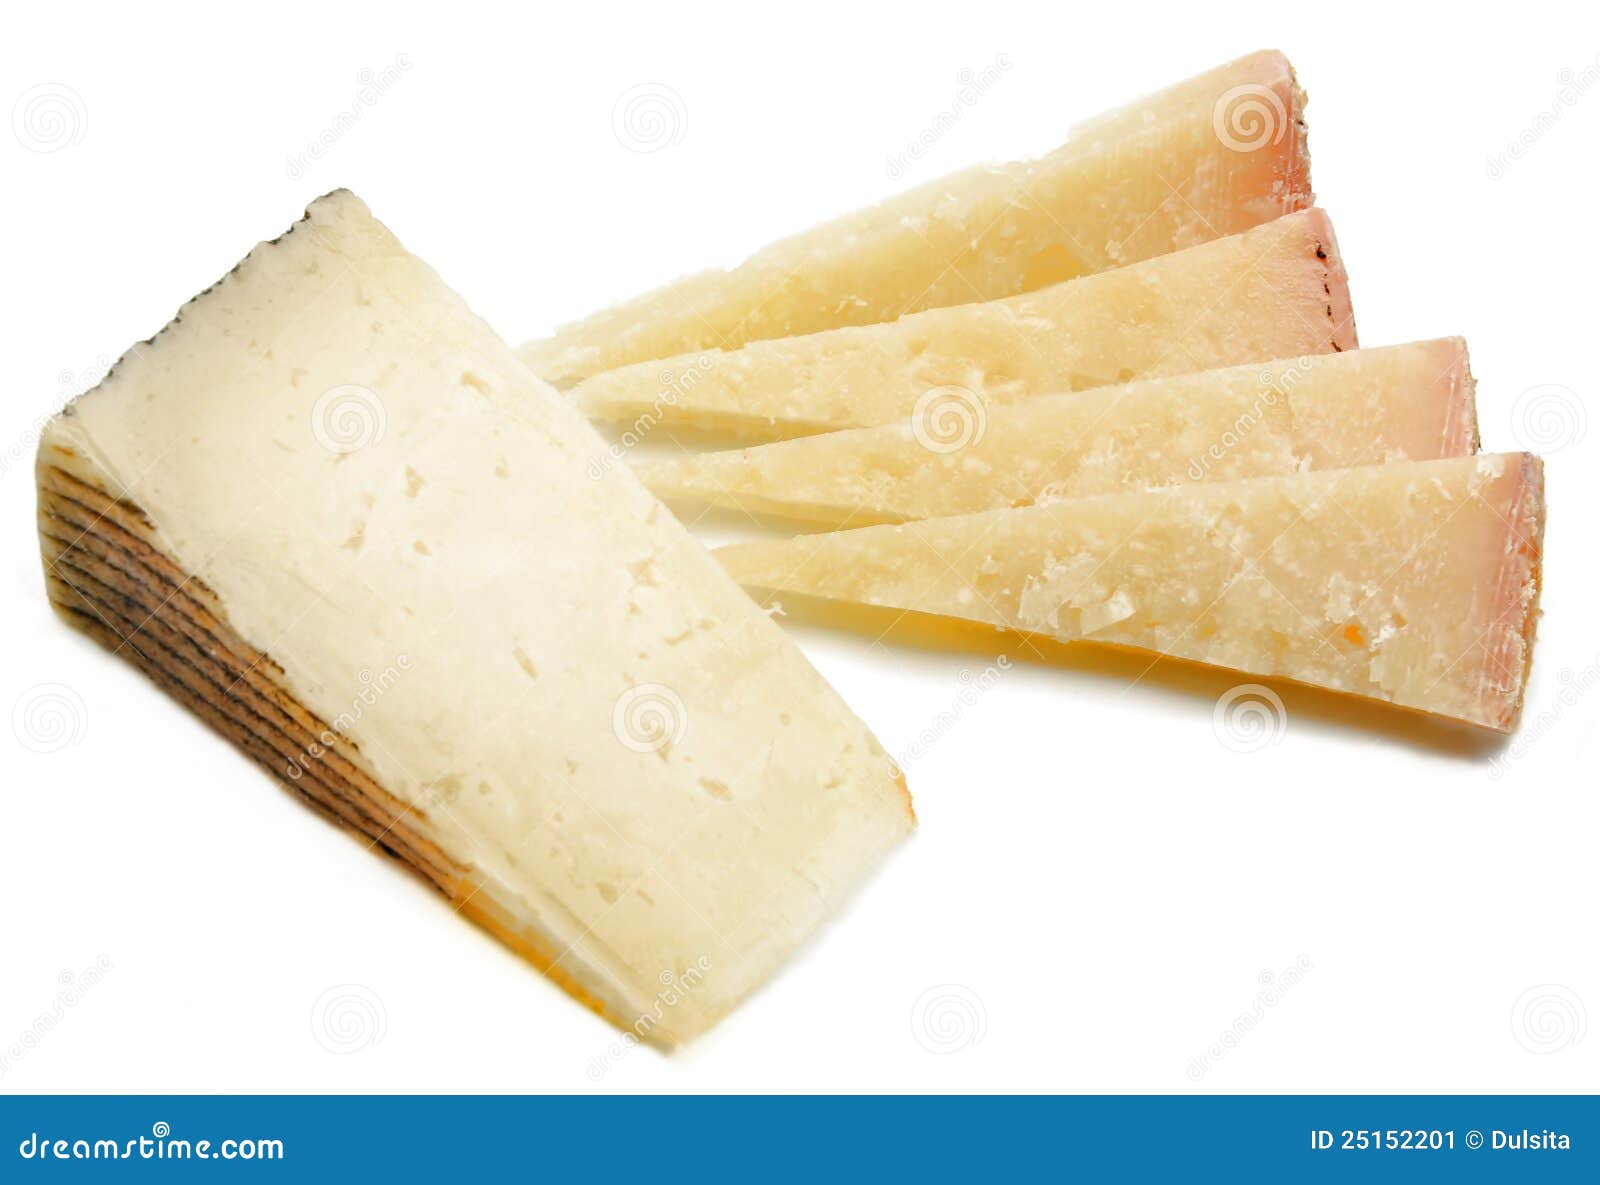 Cut Cheeses Of Various Types Stock Image - Image: 25152201